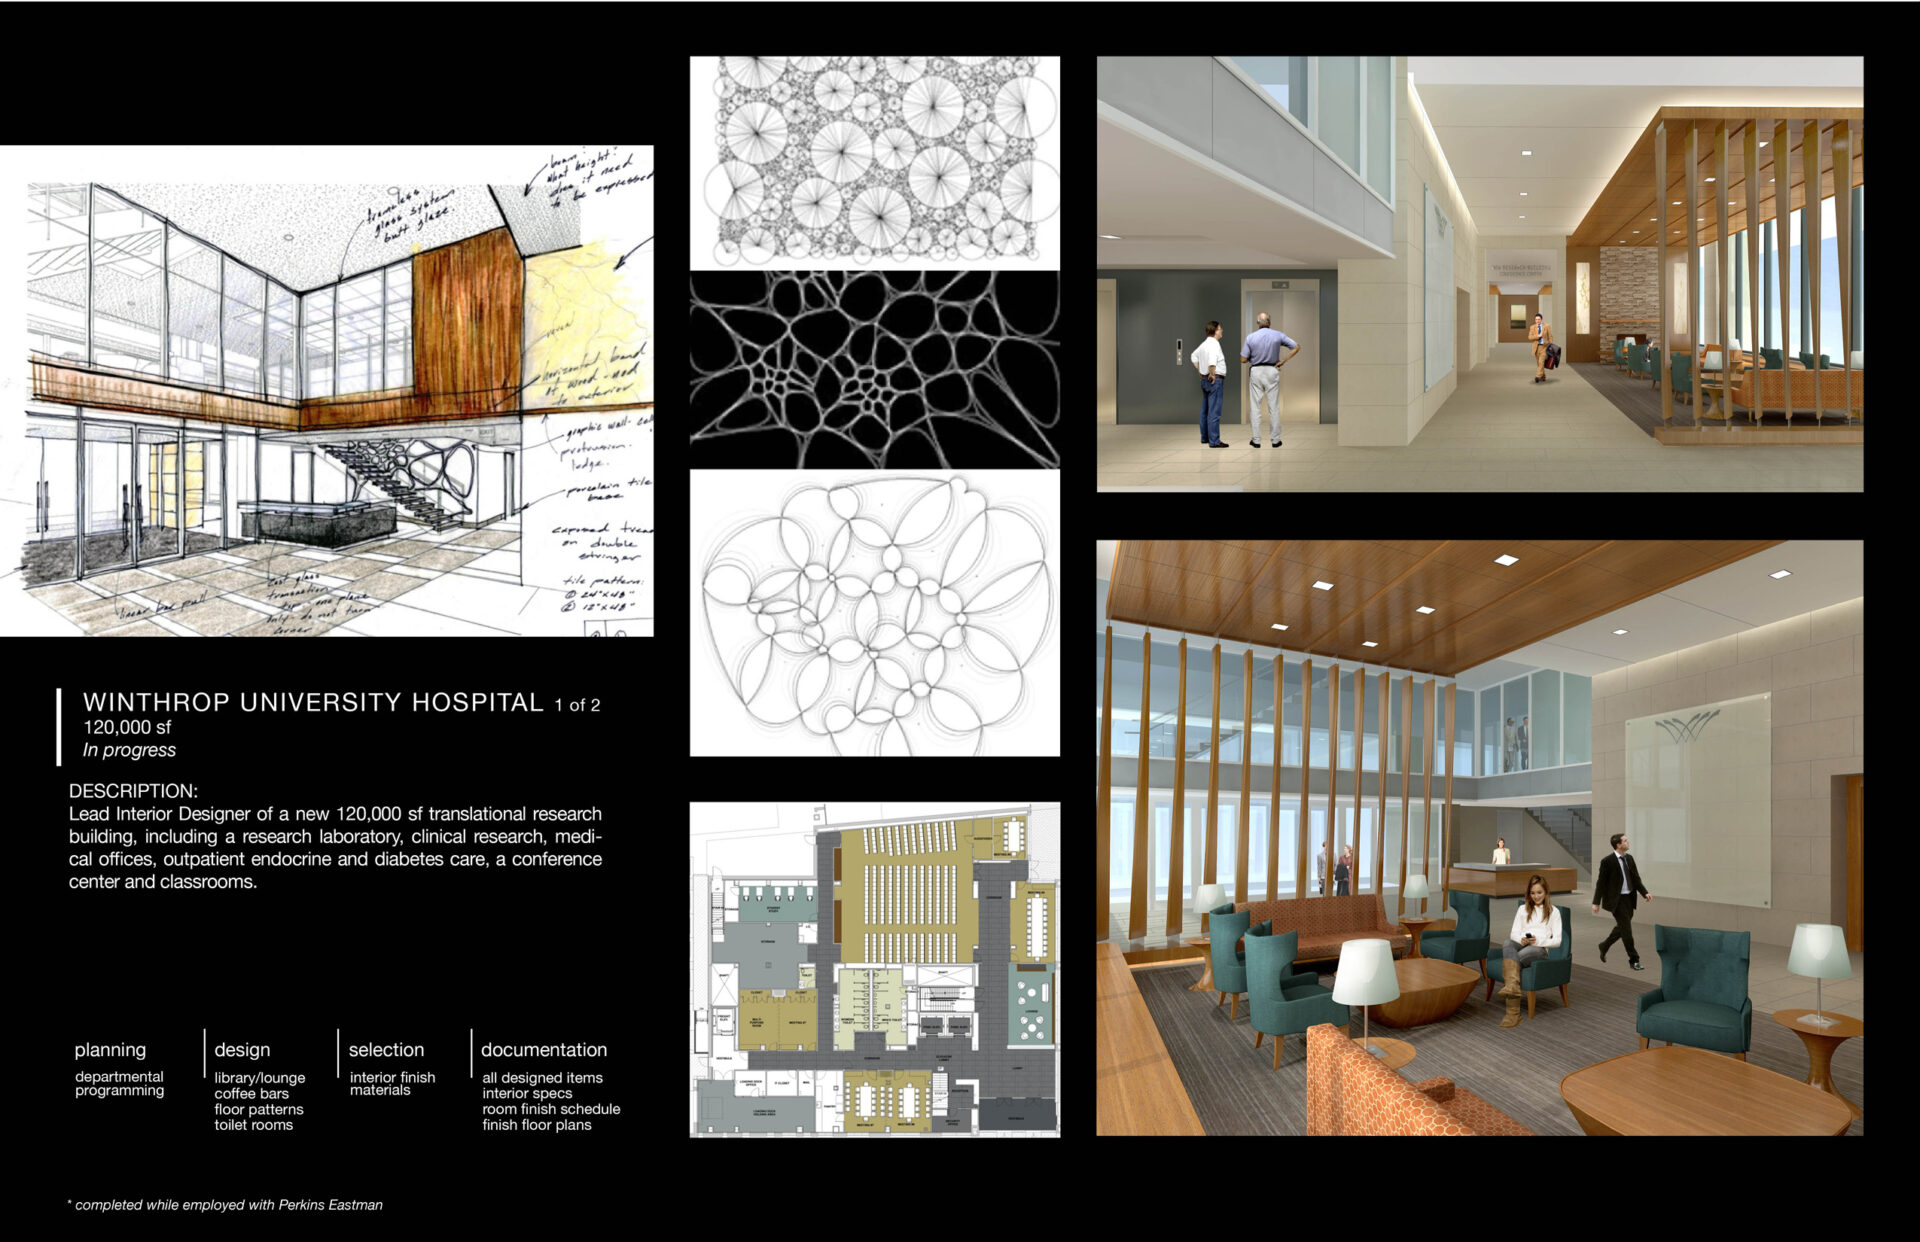 Winthrop University Hospital Research Building | Design for Healing